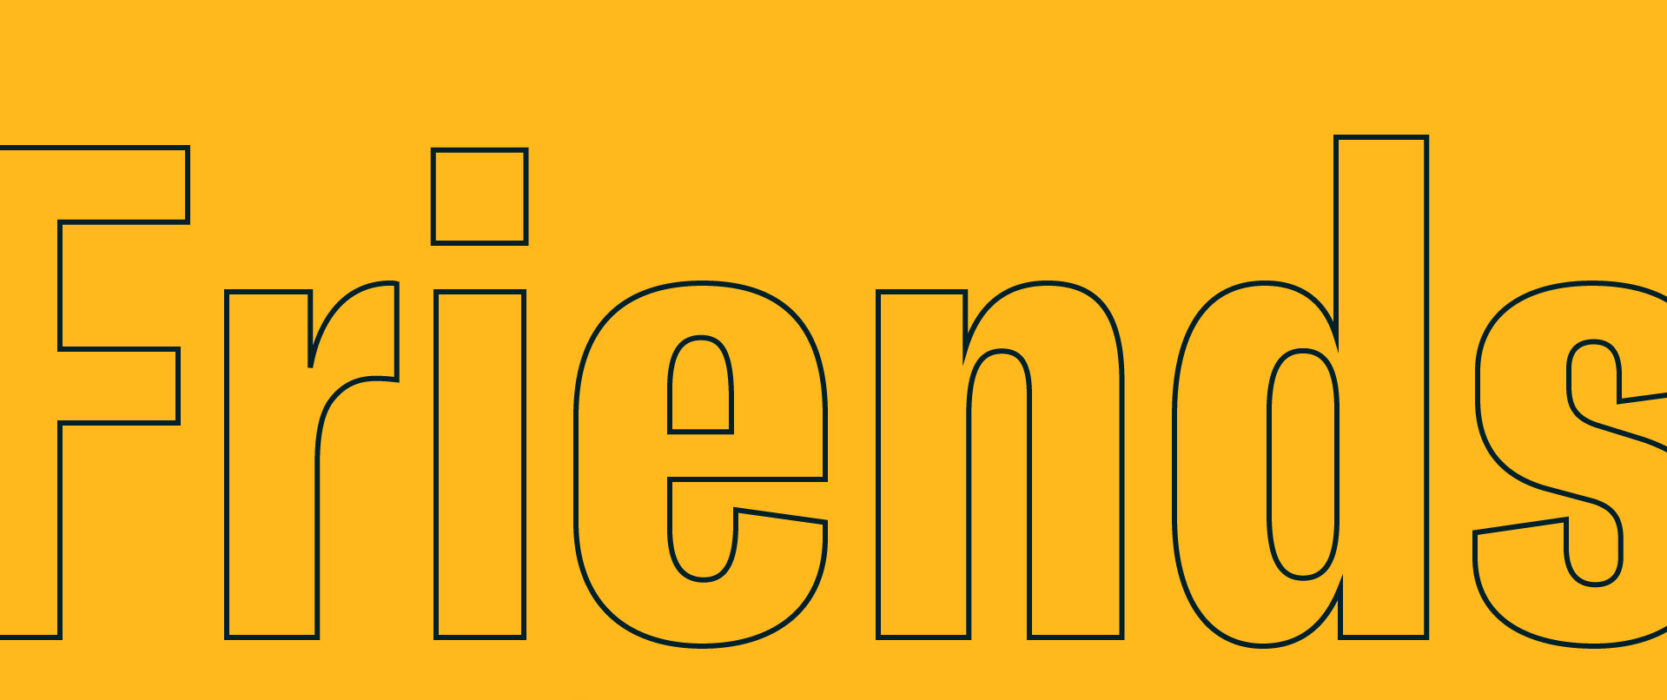 Friends logo against yellow background